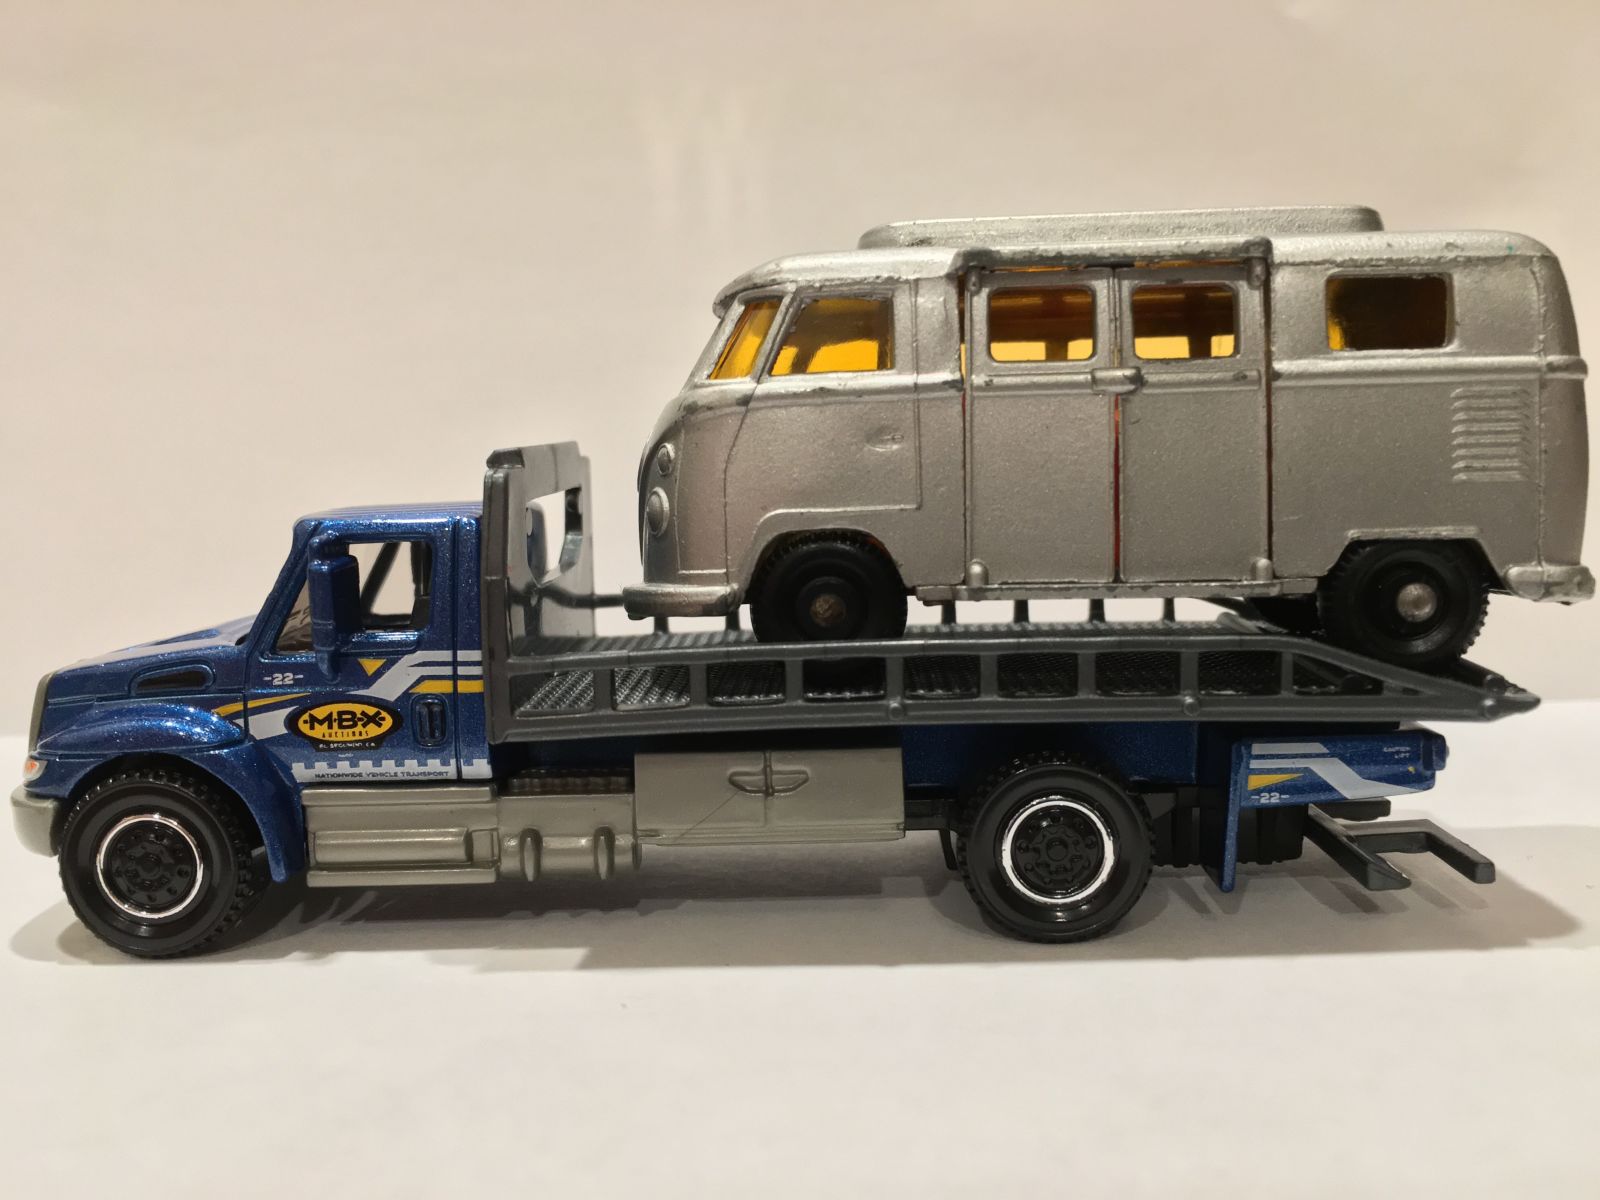 The auto hauler was something I found a few months ago...thought the VW would look cool on the back!